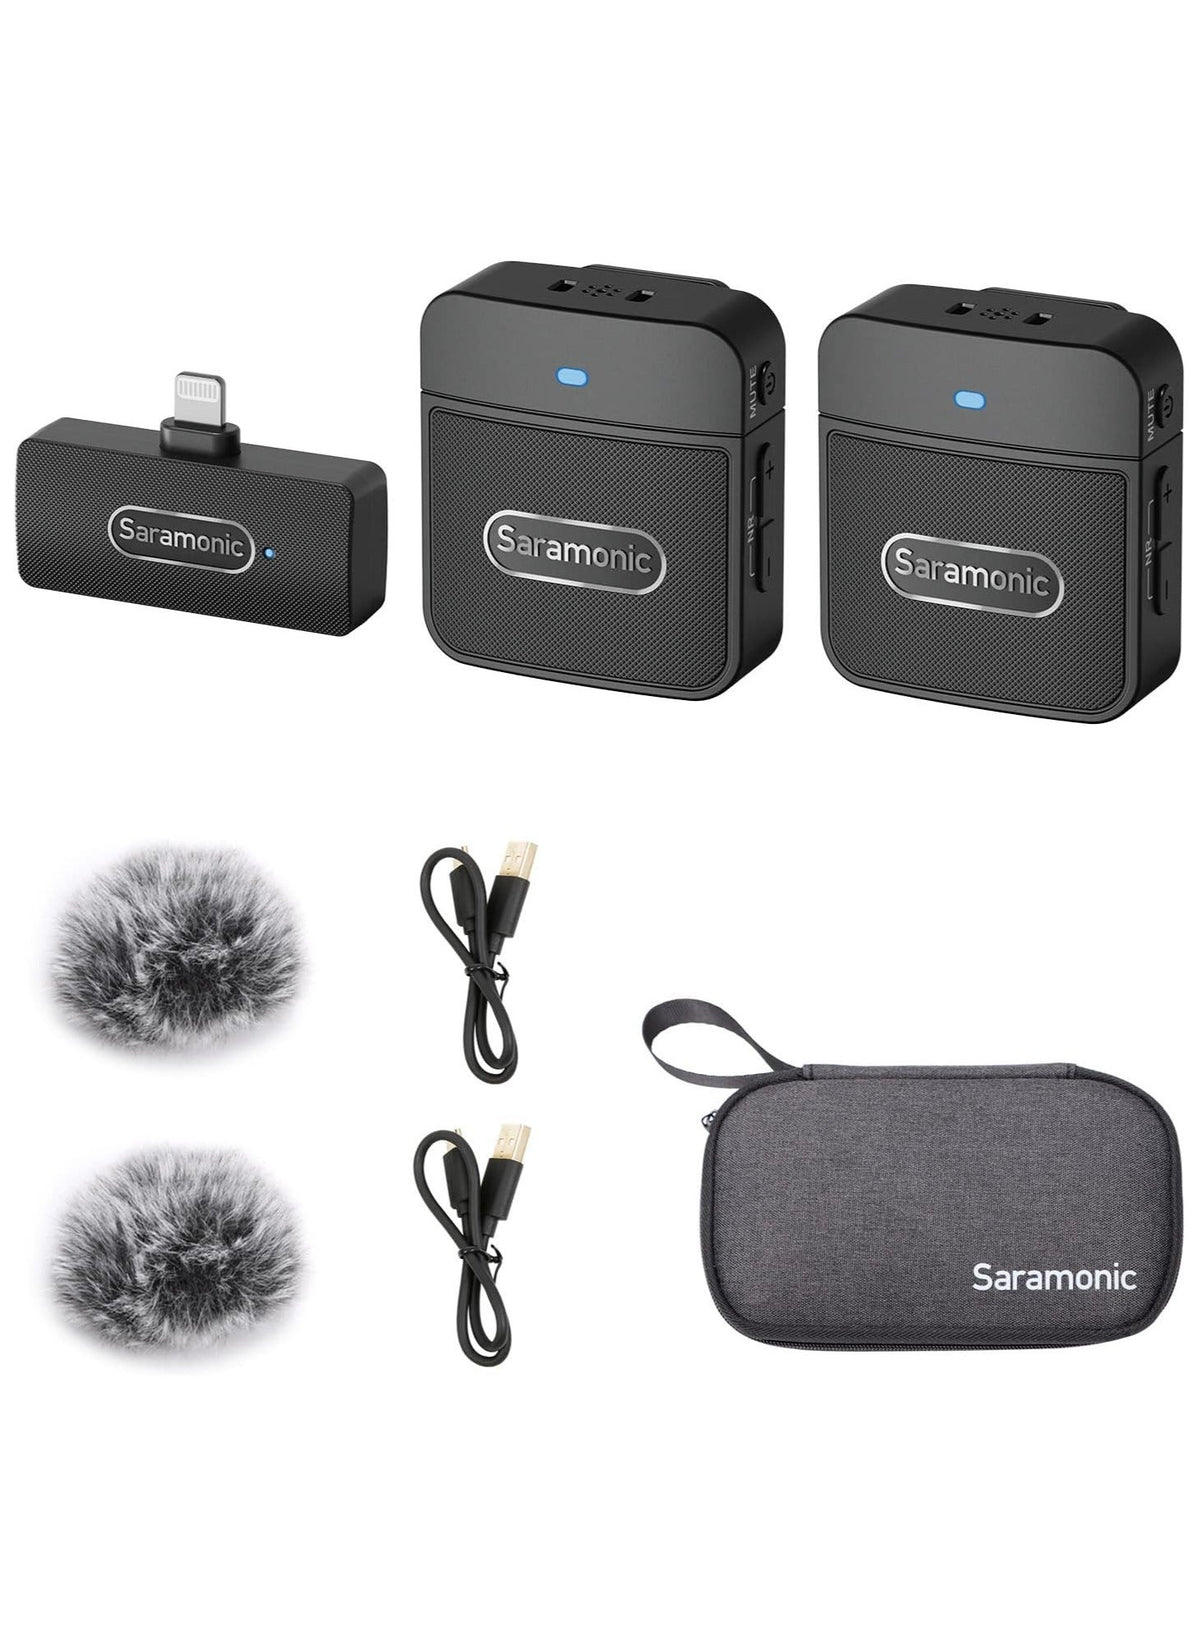 Saramonic Blink100 B4 Wireless Lavalier Microphones for iPhone iPad 2.4GHz Plug & Play Lapel Clip-on Mic With Noise